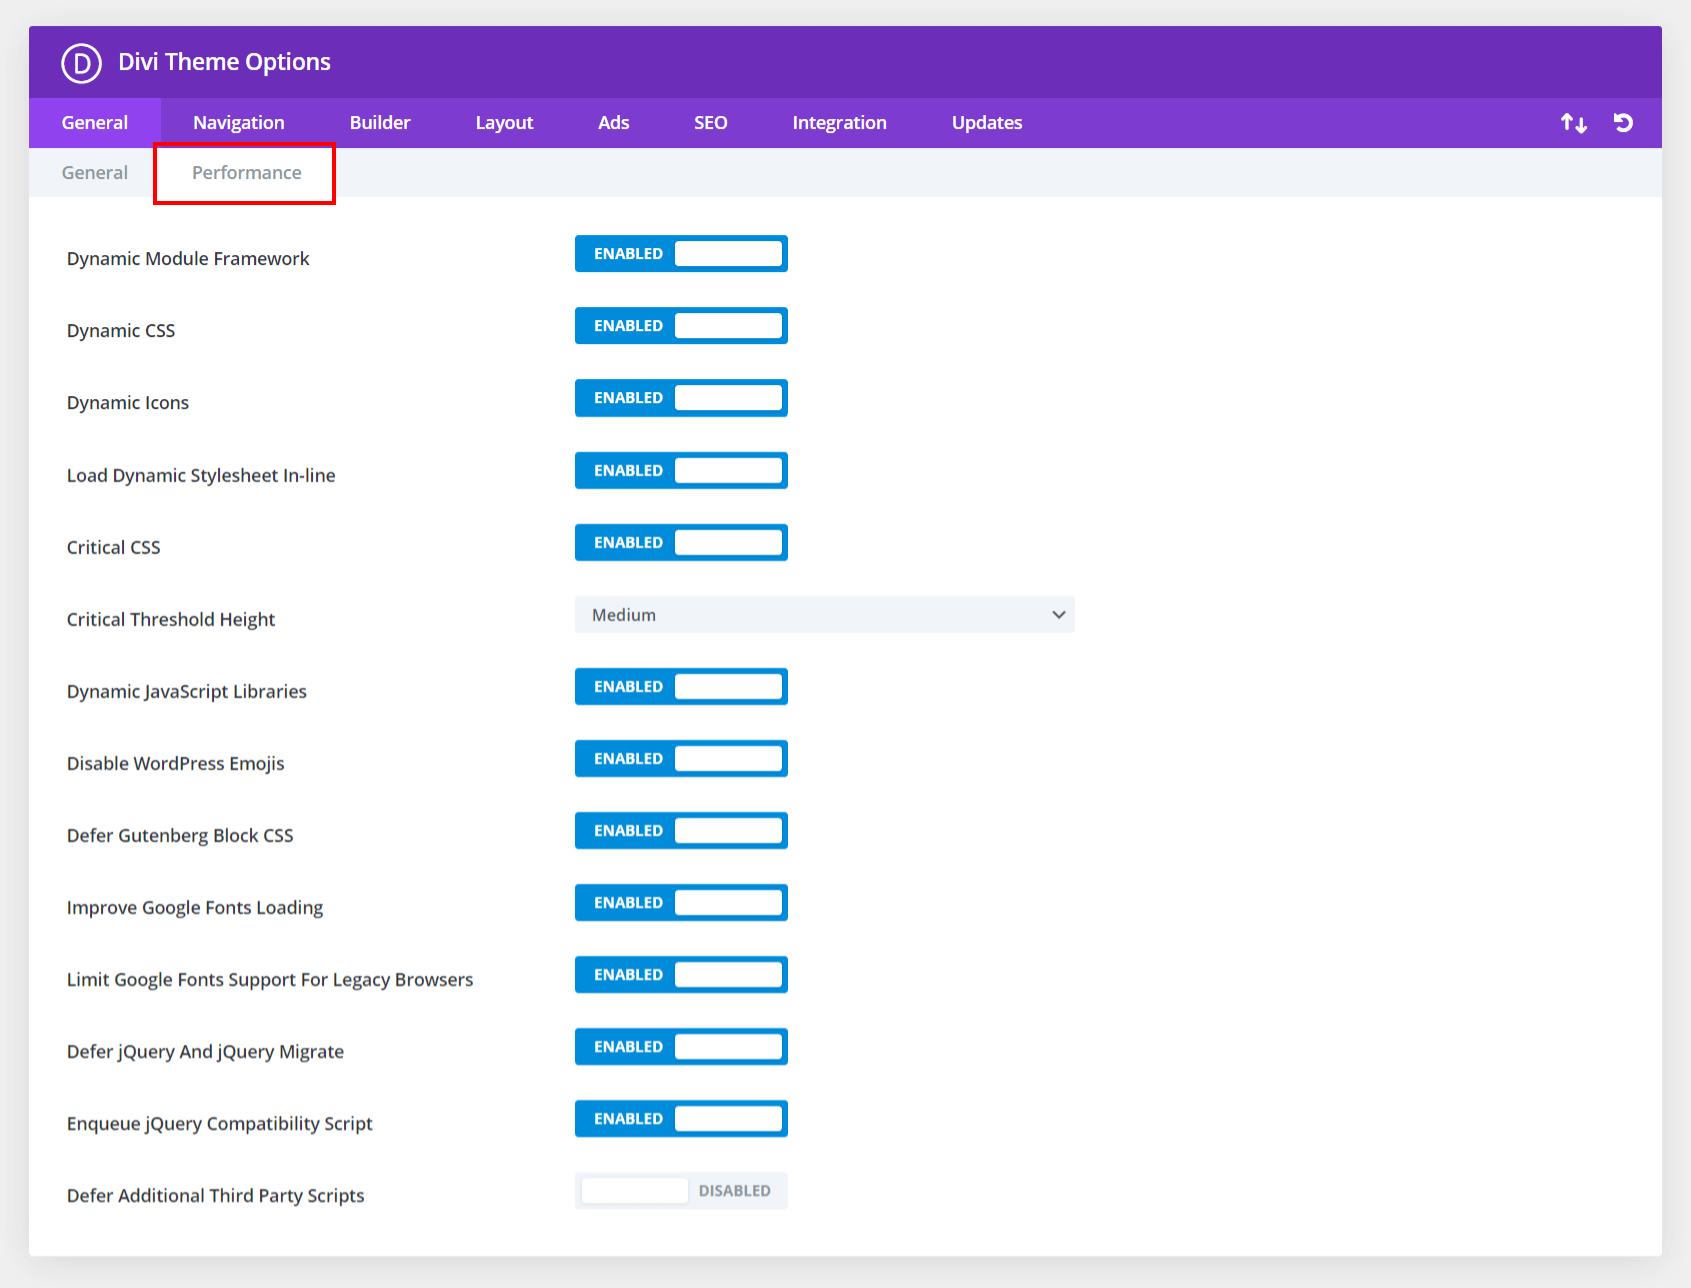 new performance tab in Divi Theme Options